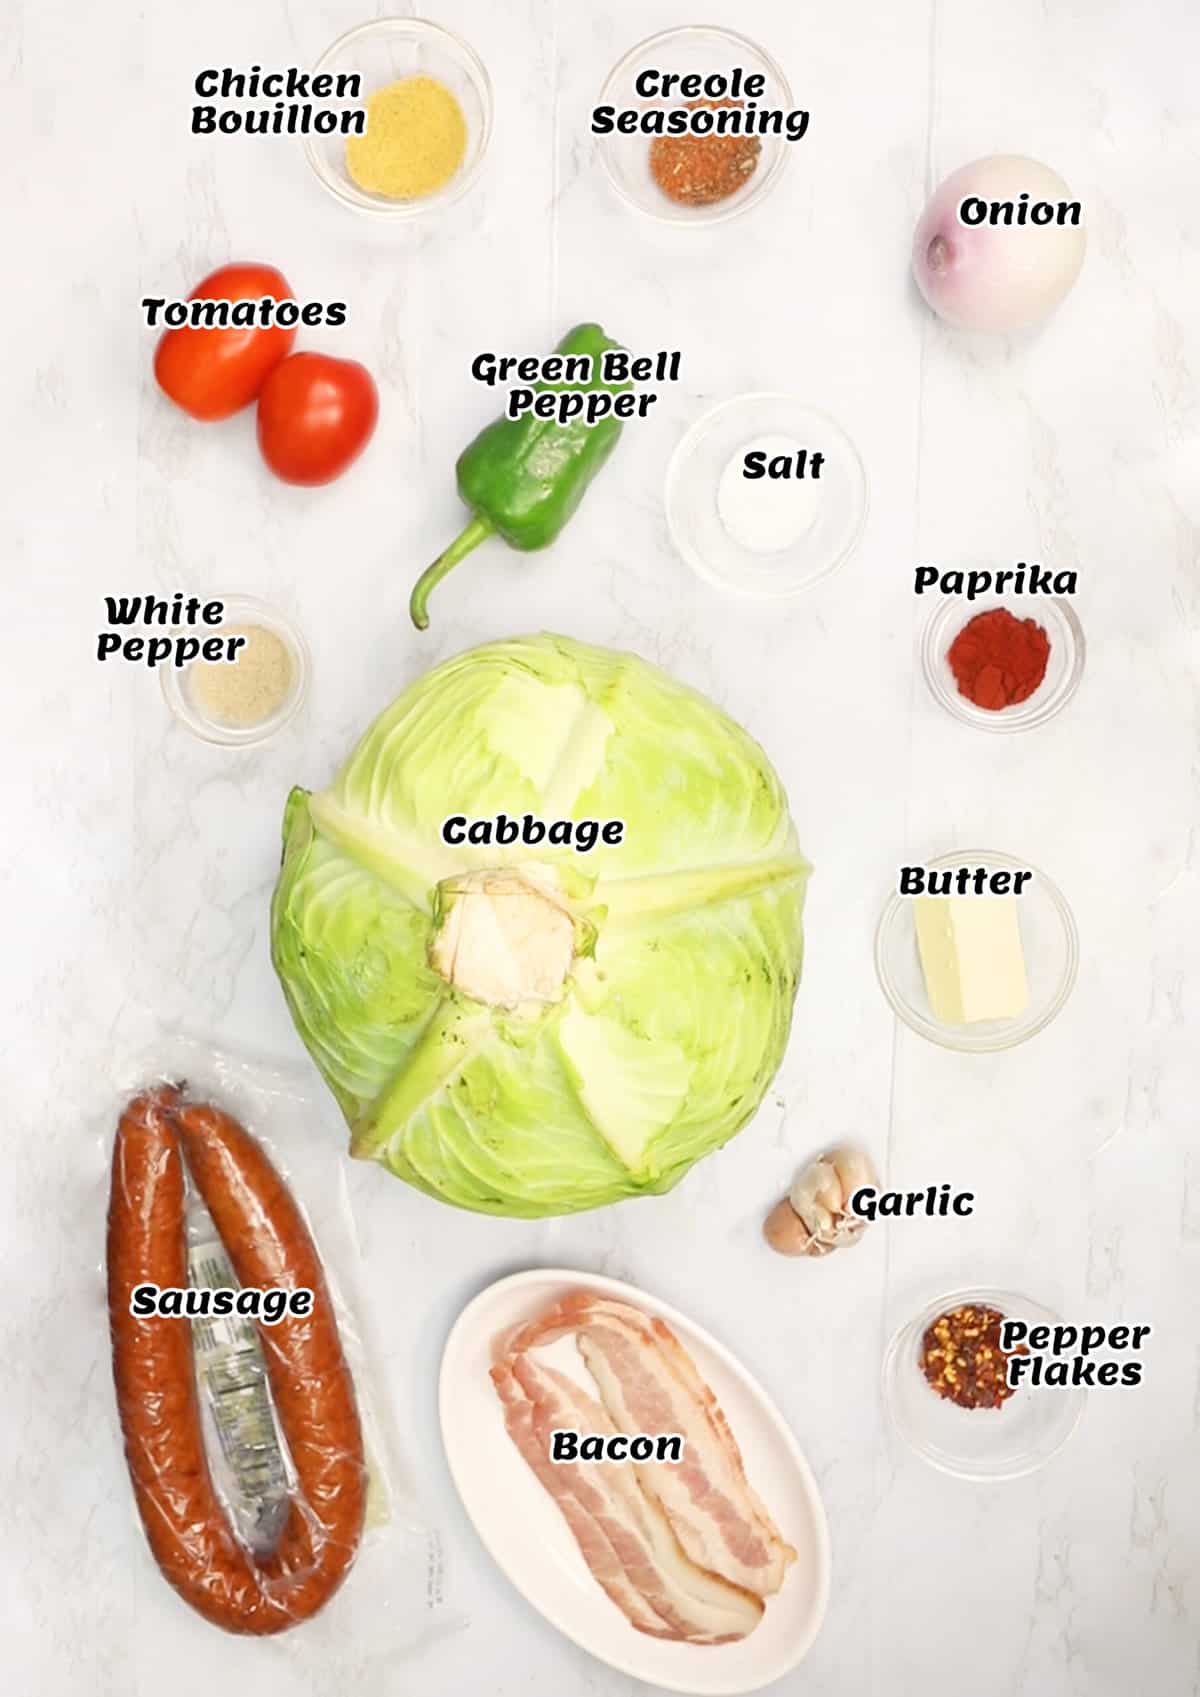 Recipe Ingredients Cabbage and sausage